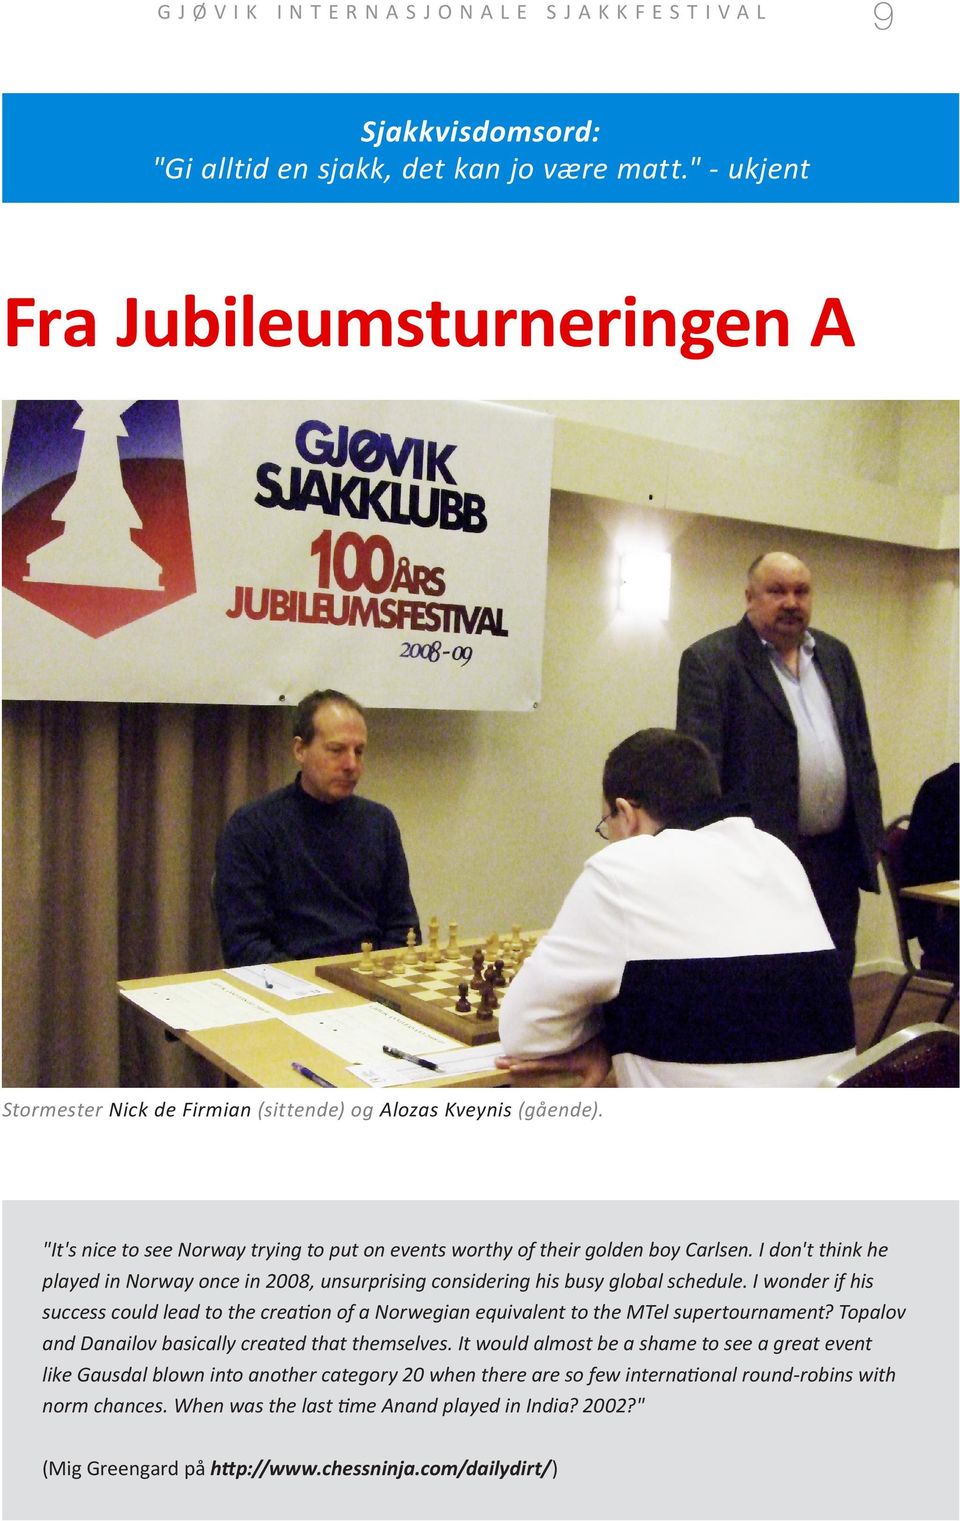 I wonder if his success could lead to the creation of a Norwegian equivalent to the MTel supertournament? Topalov and Danailov basically created that themselves.